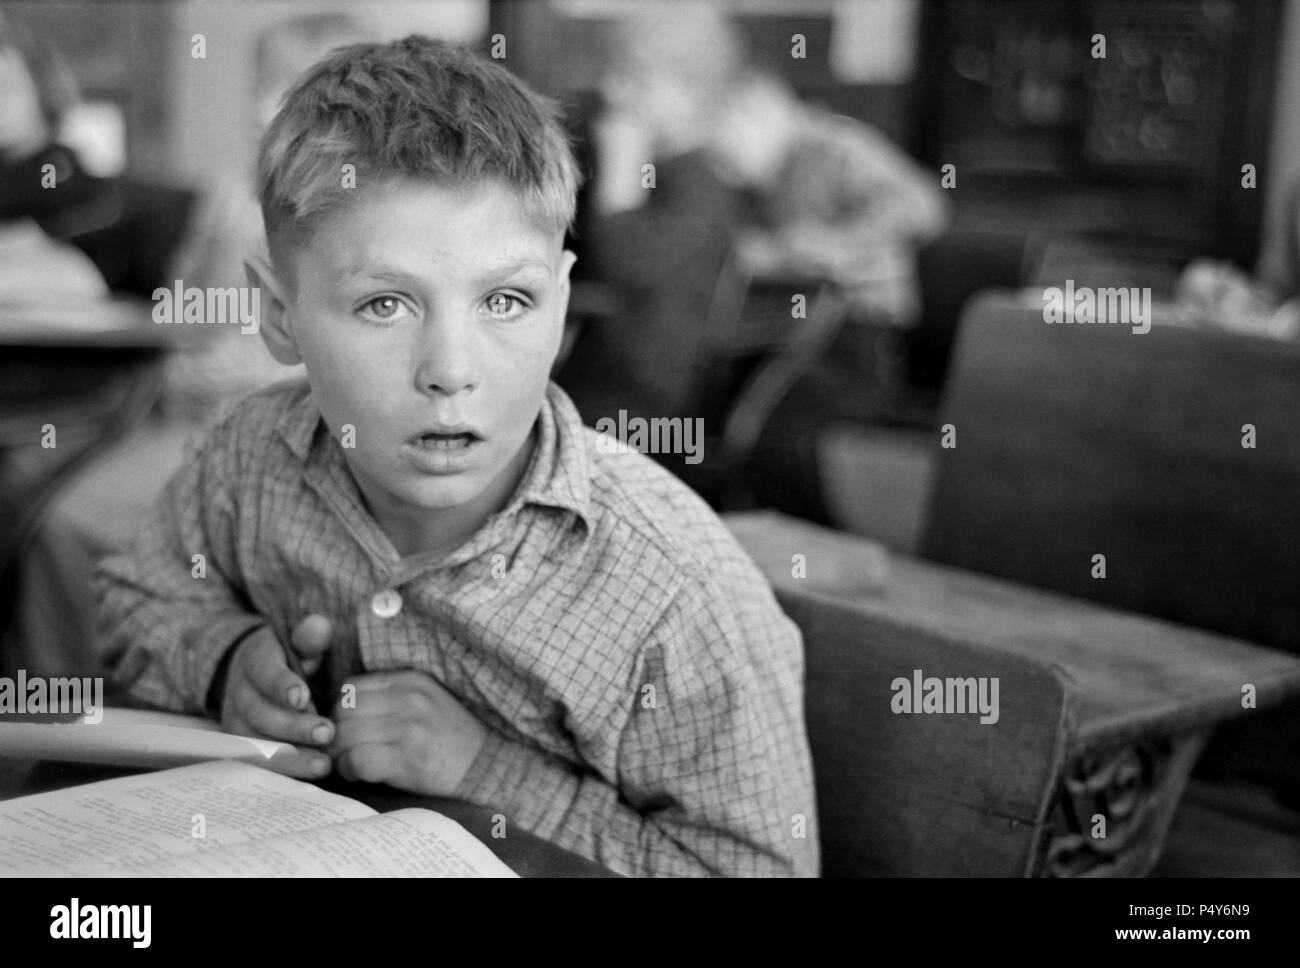 Student at Desk in Rural School, Williams County, North Dakota, USA, Russell Lee, U.S. Resettlement Administration, November 1937 Stock Photo